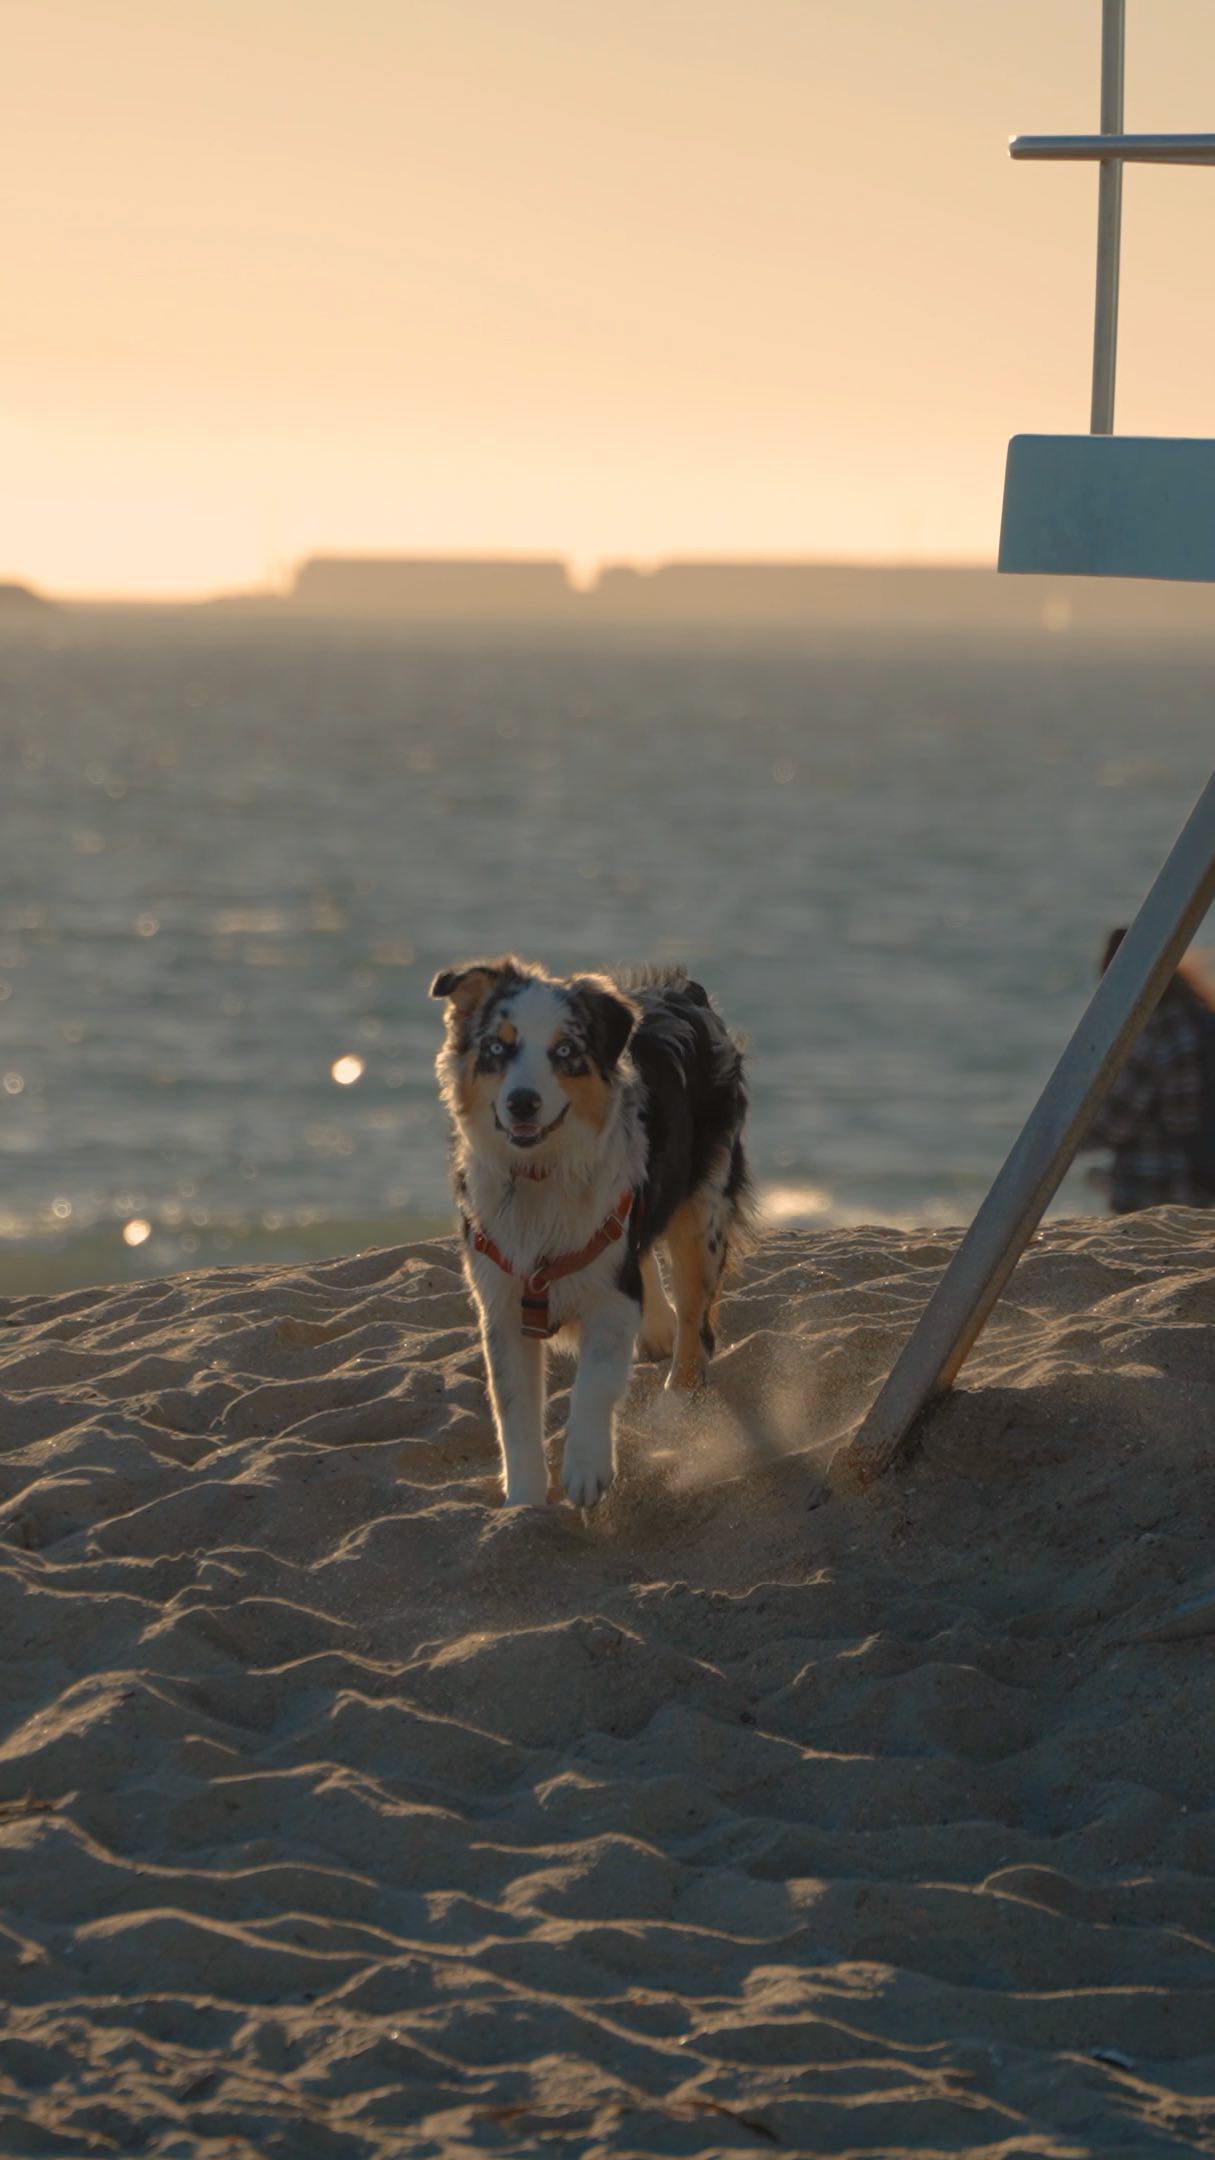 Went to go to a Dog Beach today to test out some settings on my new camera. Filming In SLOG3 Is something I usually dont do but since this camera films in 10bit 422 color might as well start... Its pretty difficult. #slog3 #sony #a7siii